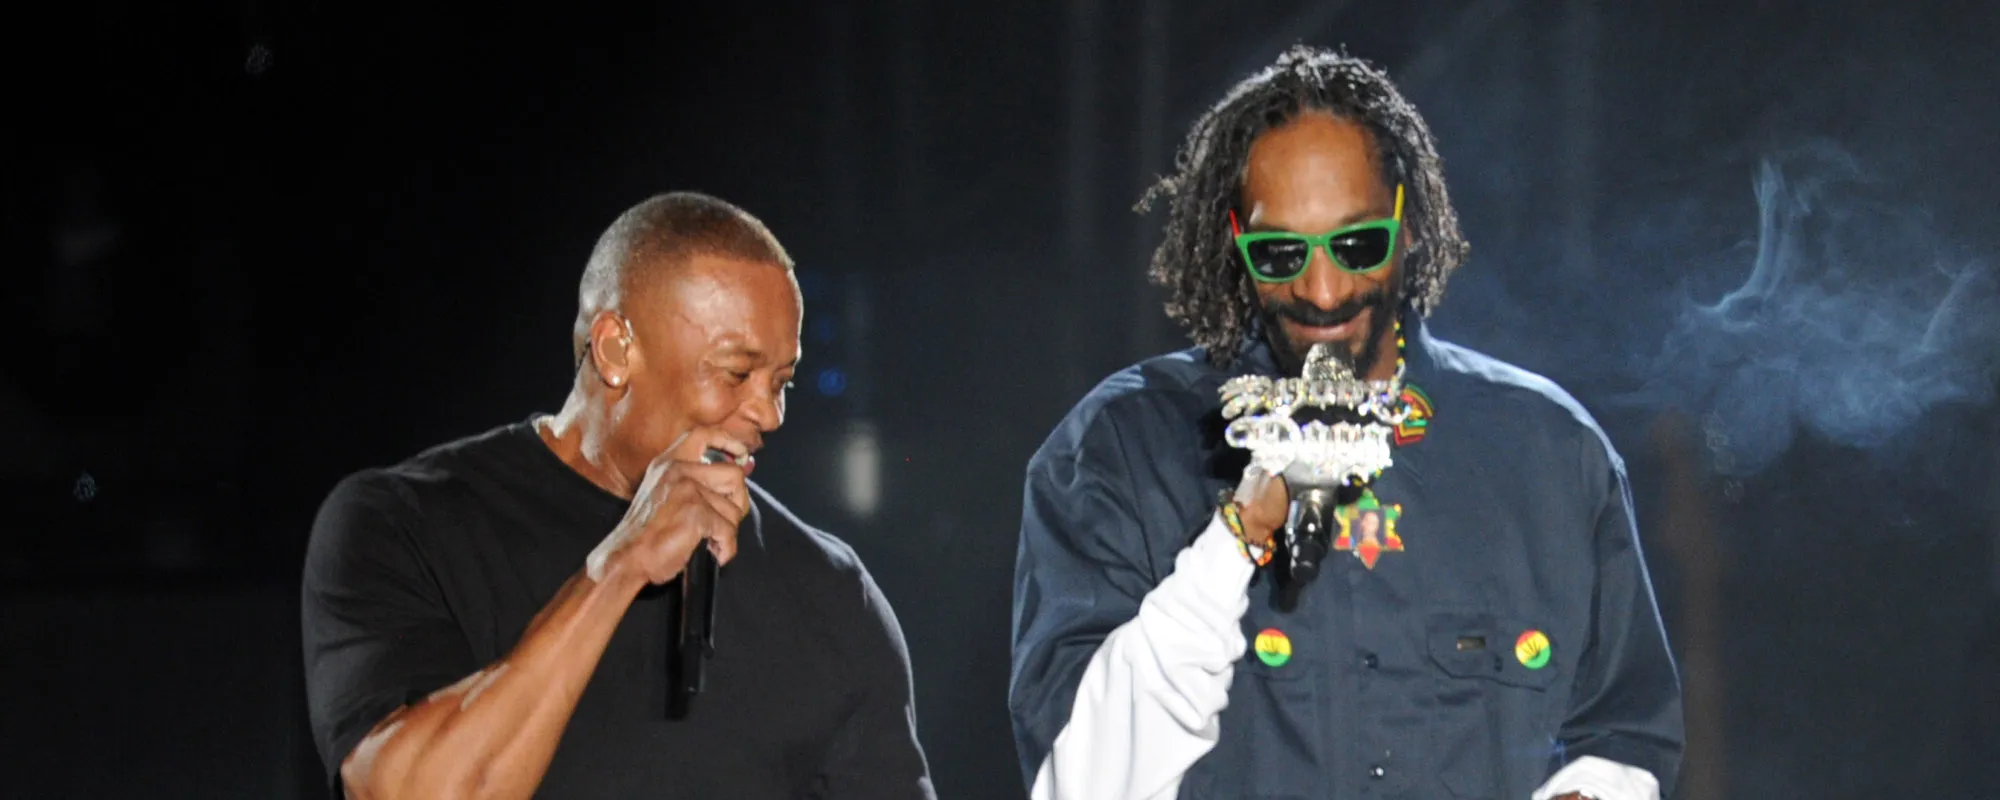 The Story Behind Dr. Dre and Snoop Dogg’s Iconic “Still D.R.E.”